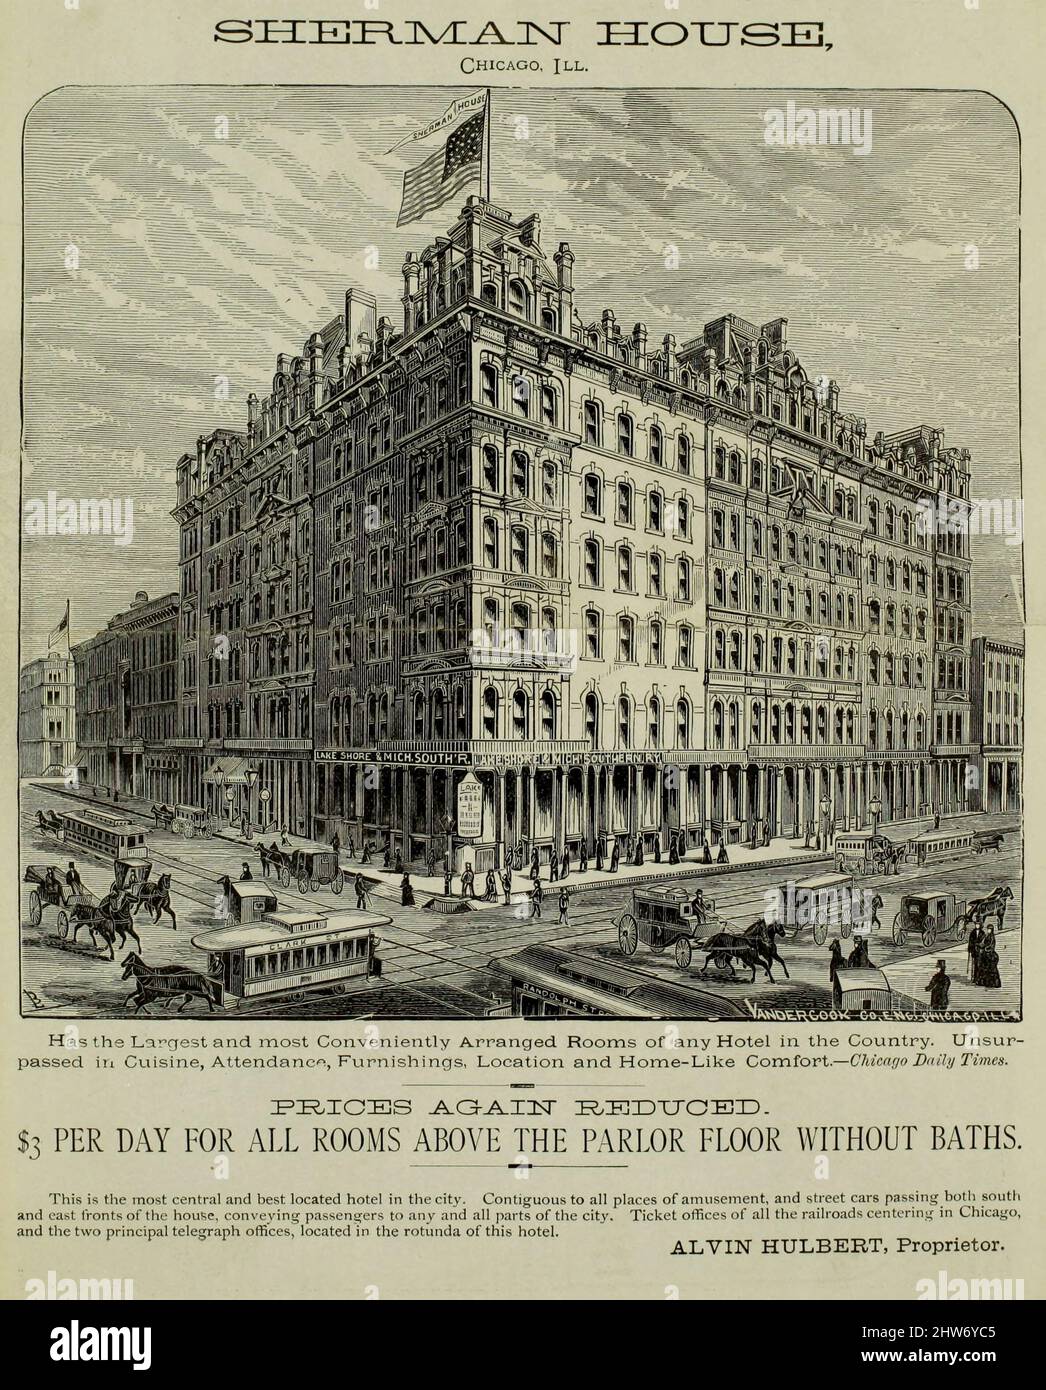 Sherman House Hotel Chicago, III from the book Crofutt's new overland tourist and Pacific coast guide : containing description cities, towns, villages, stations, government fort and camps, mountains, lakes, rivers, sulphur, soda and hot springs, scenery, watering places, and summer resorts : where to look for and hunt the buffalo, antelope, deer and other game; trout fishing, through Nebraska, Wyoming, Colorado, Utah, Montana, Idaho, Nevada, California and Arizona by George A Crofutt, Published in Chicago, Ill., by The Overland Pub. Co in 1879 Stock Photo